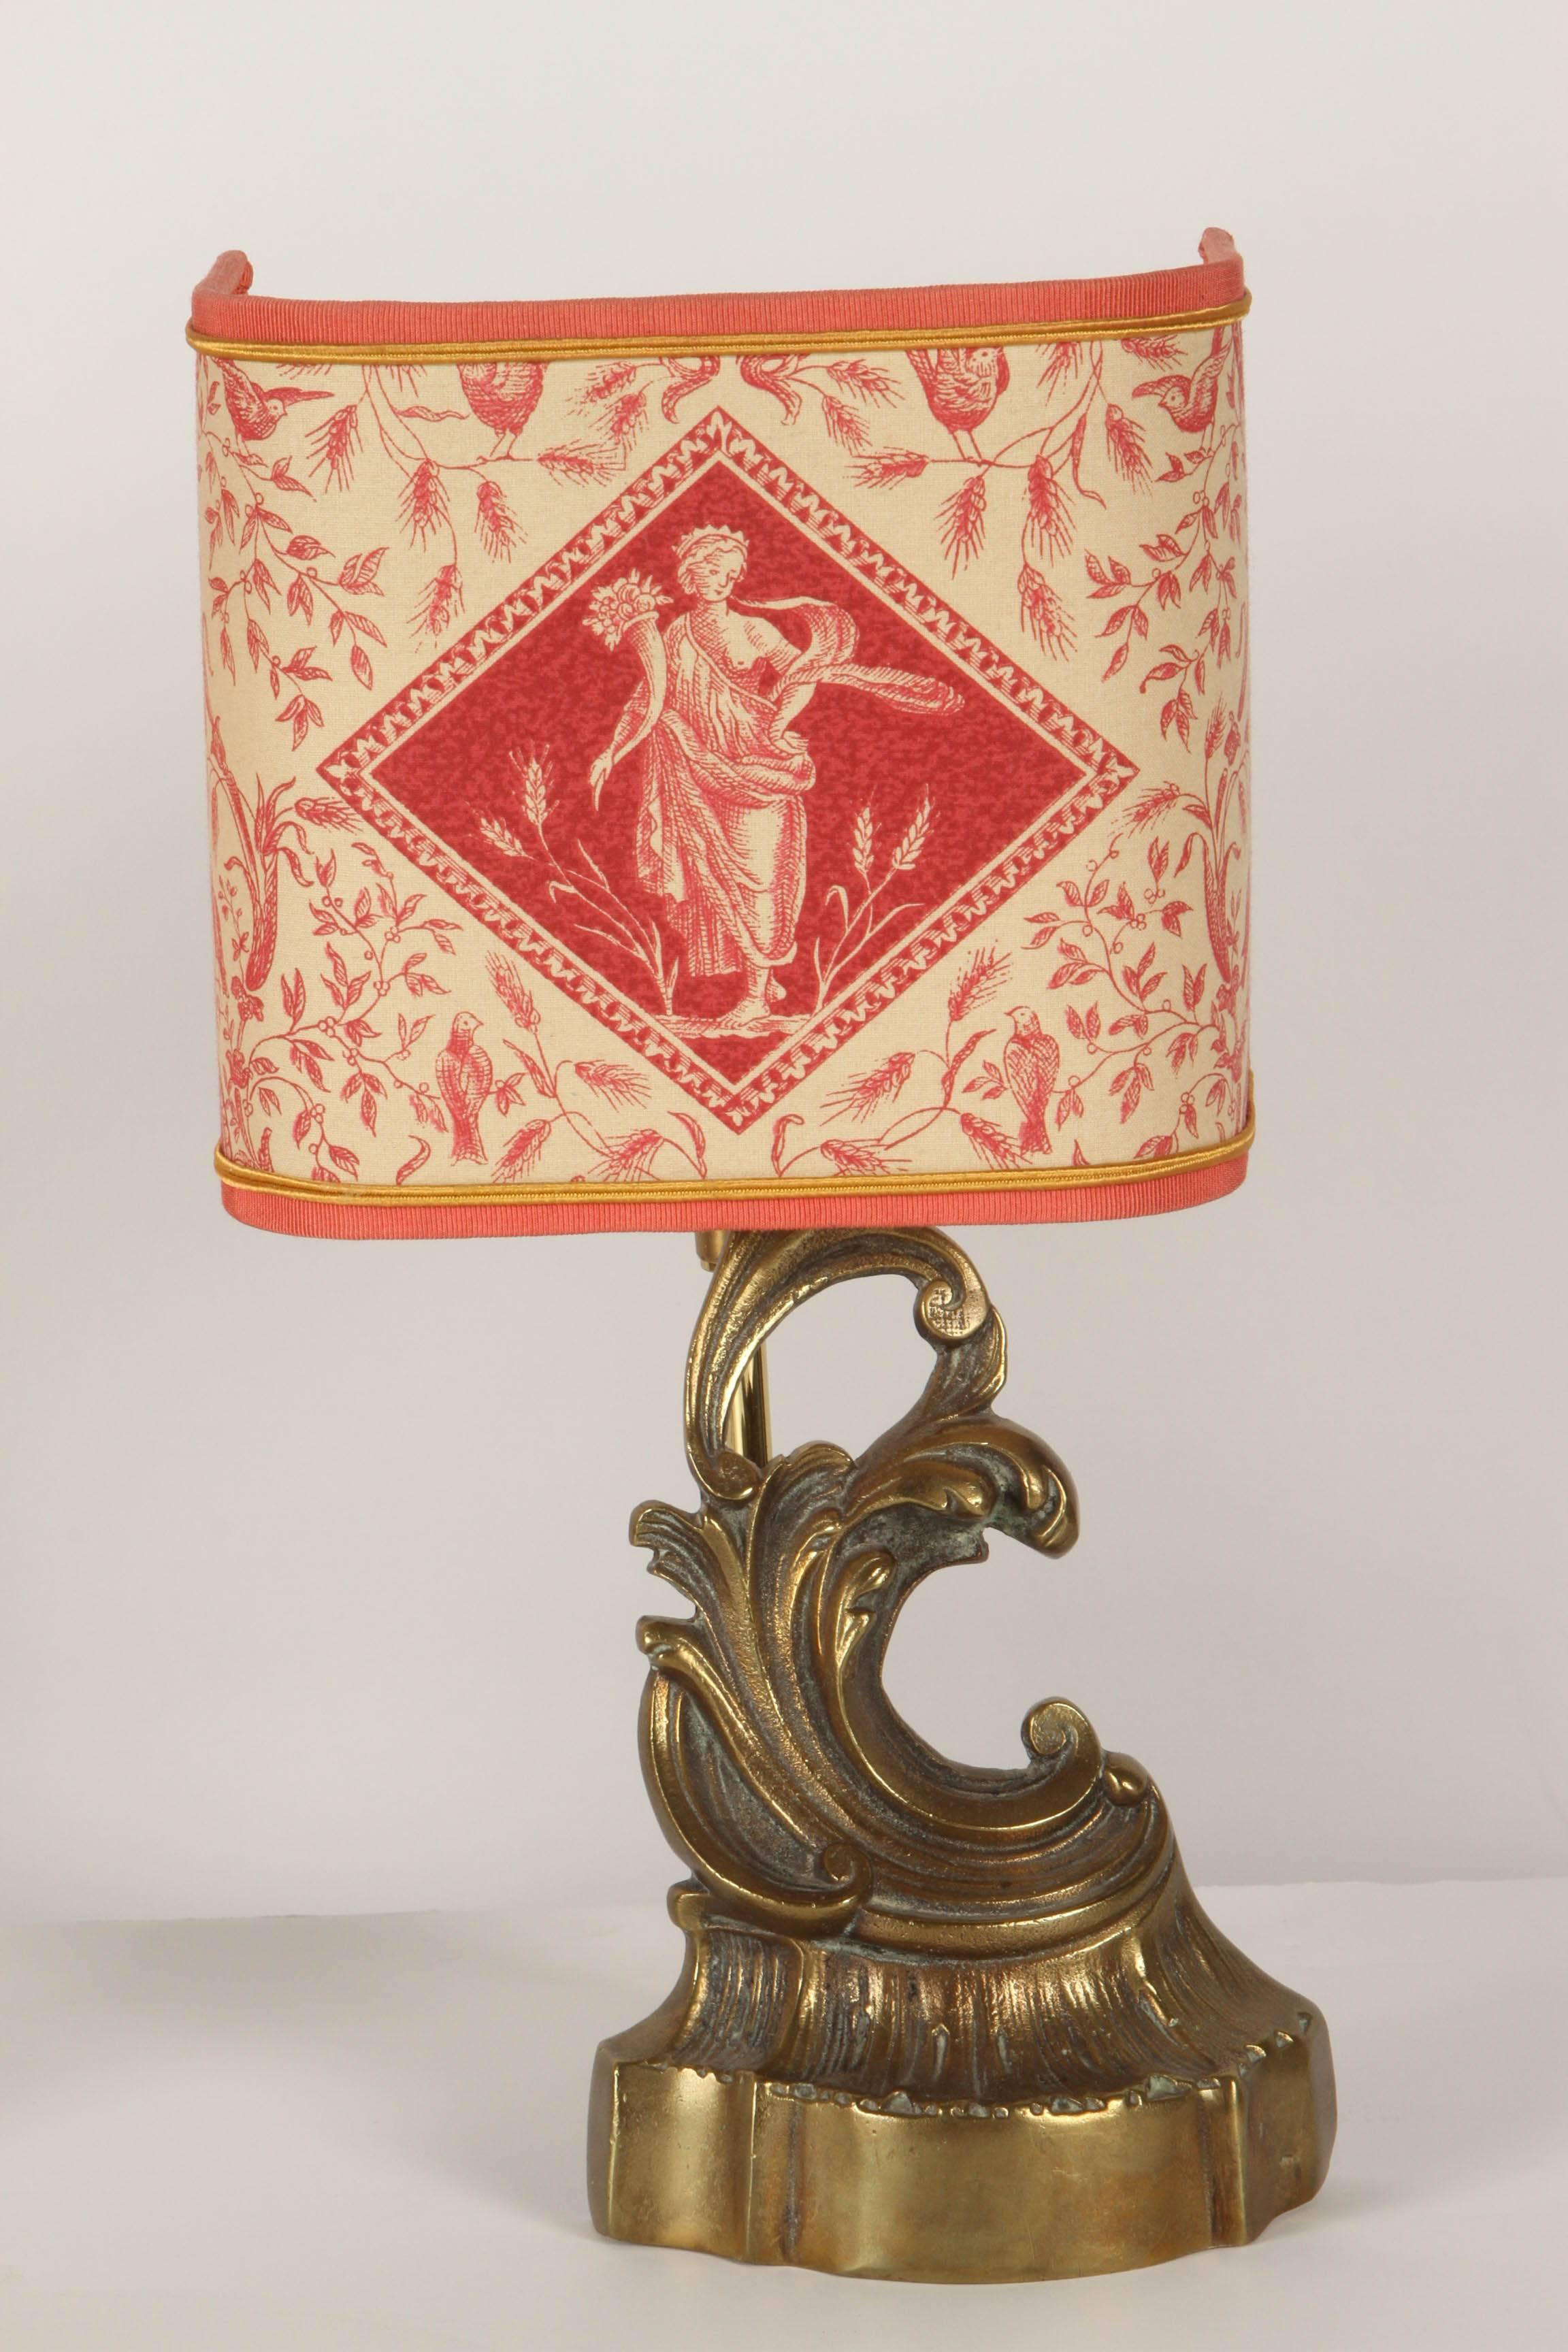 A pair of new electric lamps made from 19th Century andirons. The andirons are in an upswept shape, much like a rising ocean wave. Each of the andirons is topped by a three-sided shade that depicts a classical Greek goddess type of female figure and